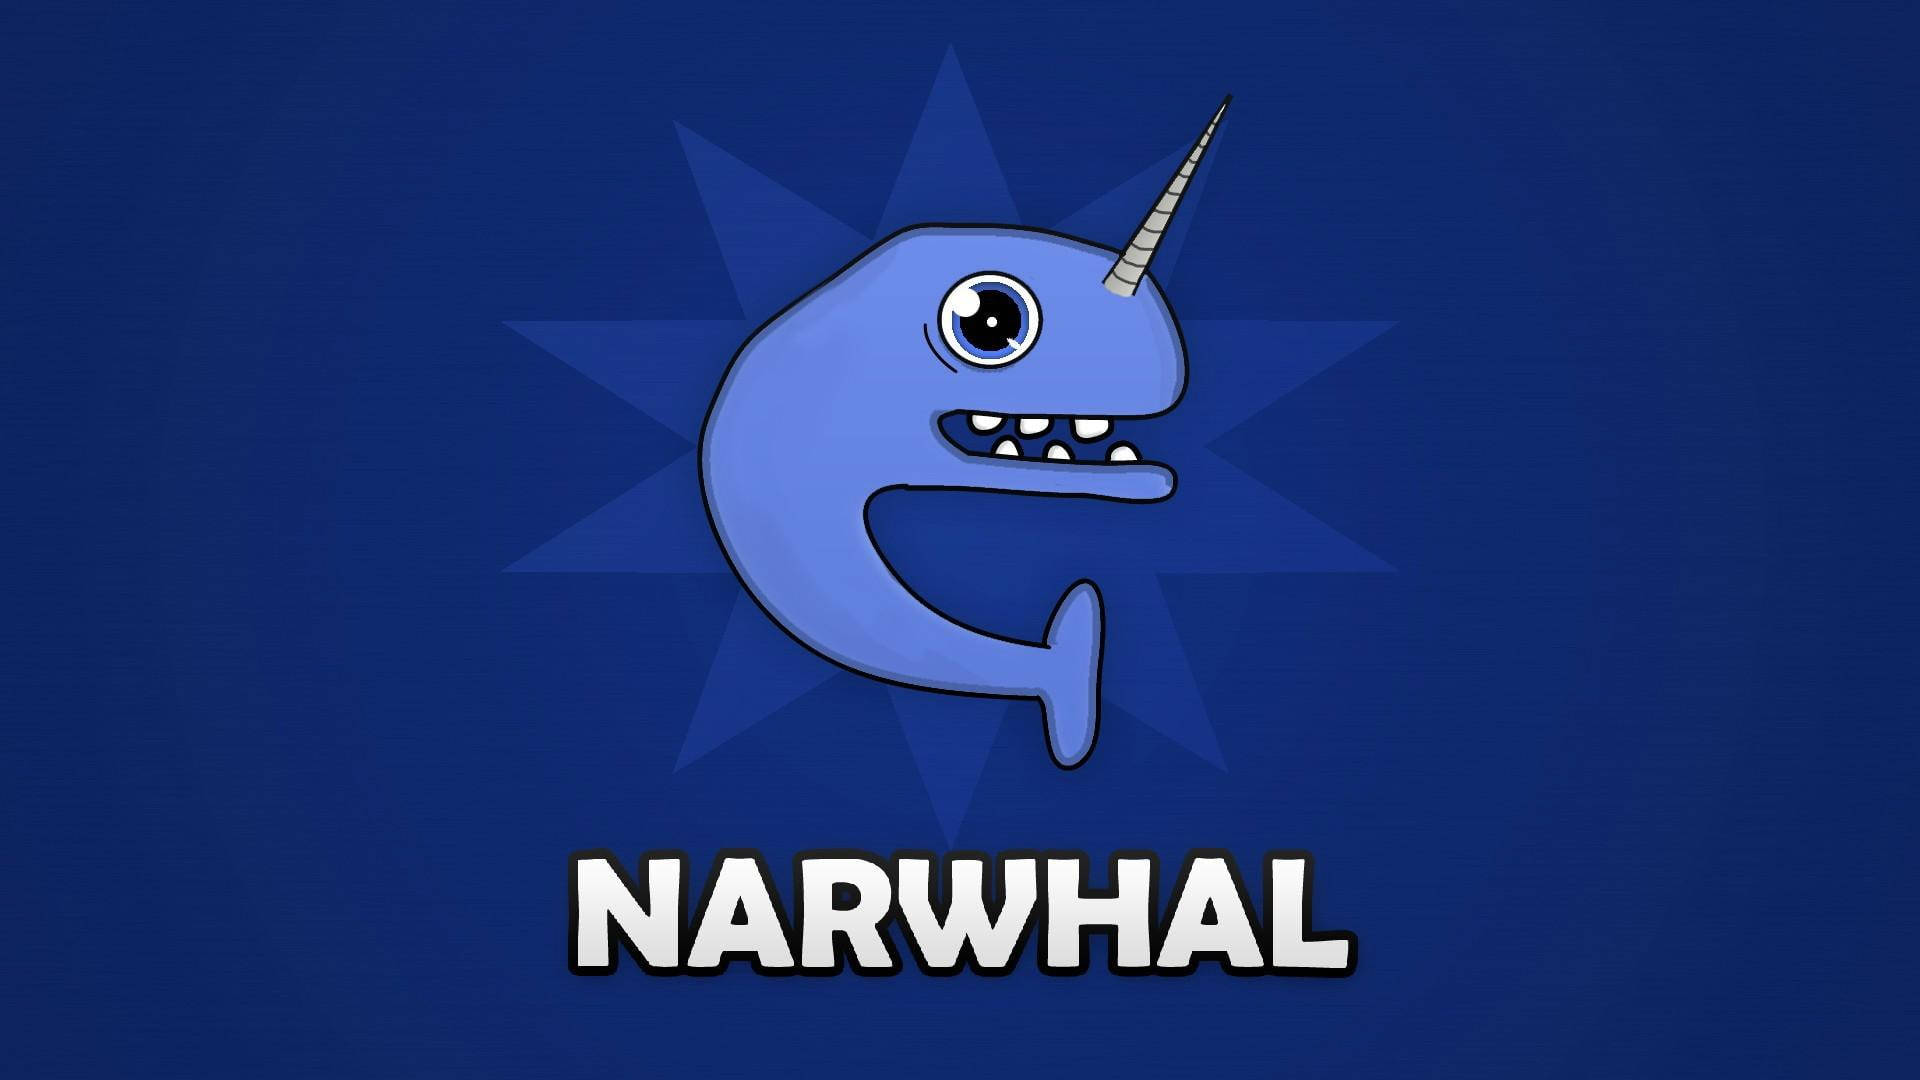 Funny Narwhal Art Background